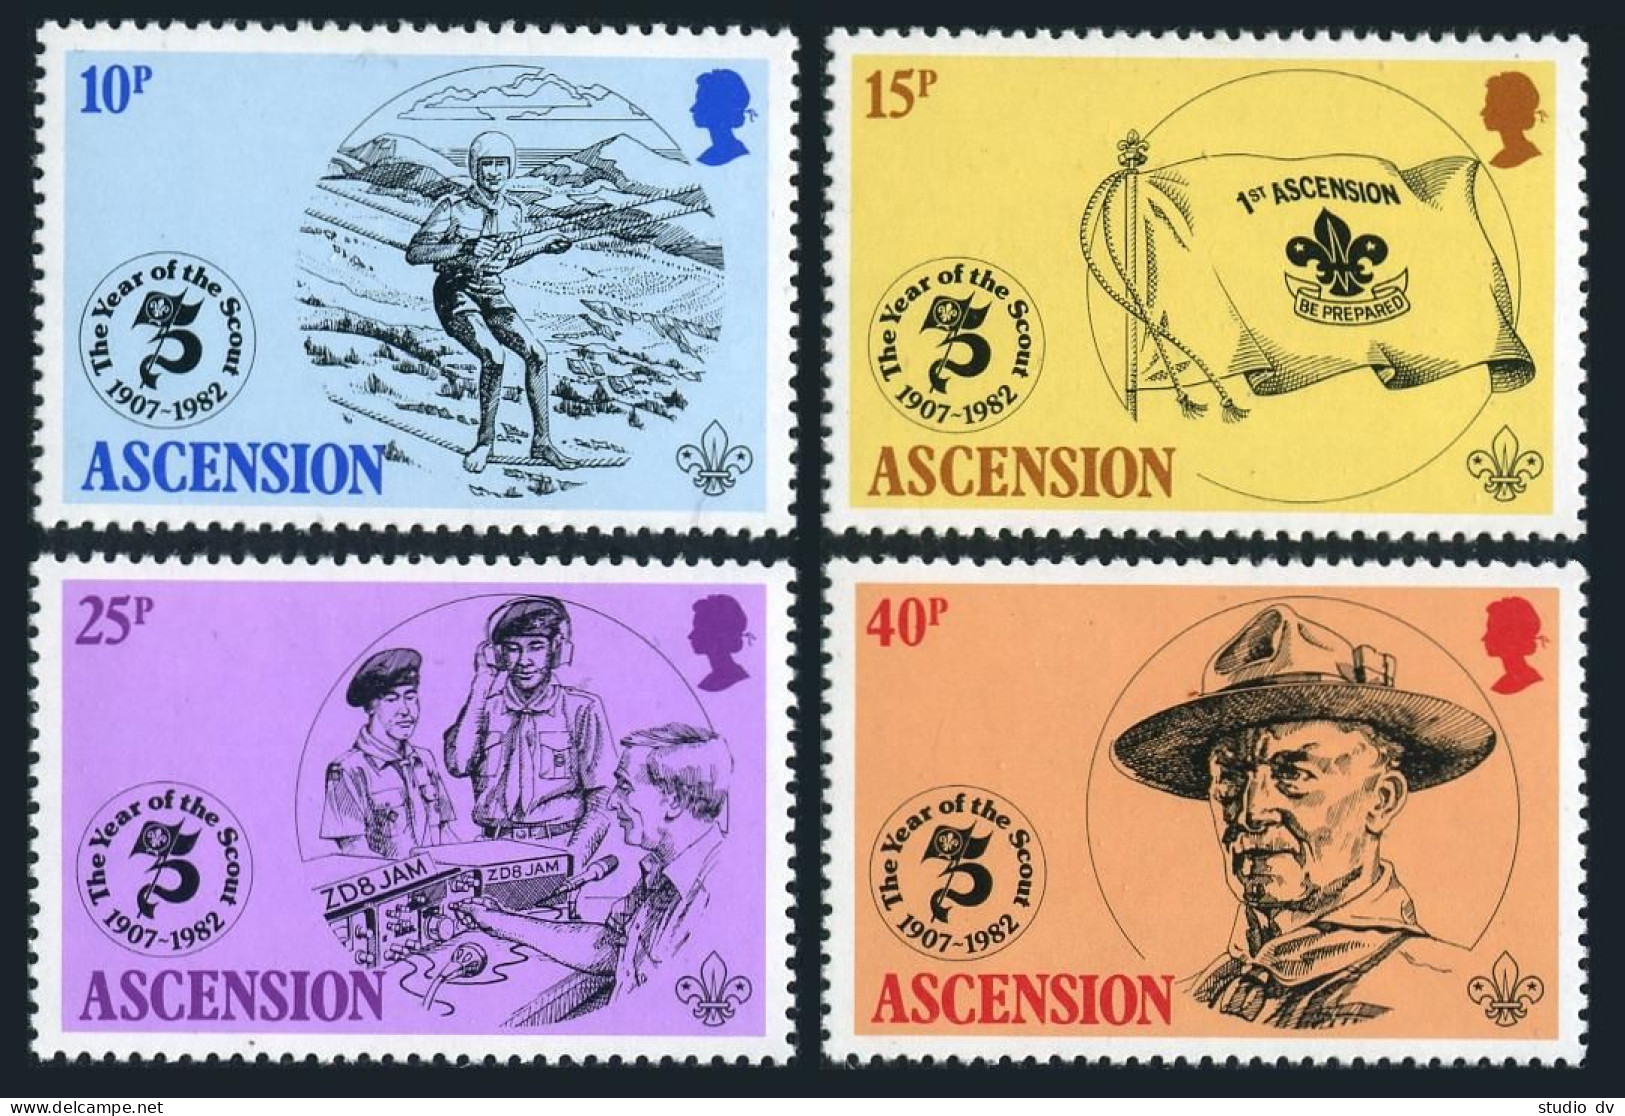 Ascension 301-304,304a,MNH.Mi 306-309,Bl.13. Scouting Year 1982,Baden-Powell. - Ascensione